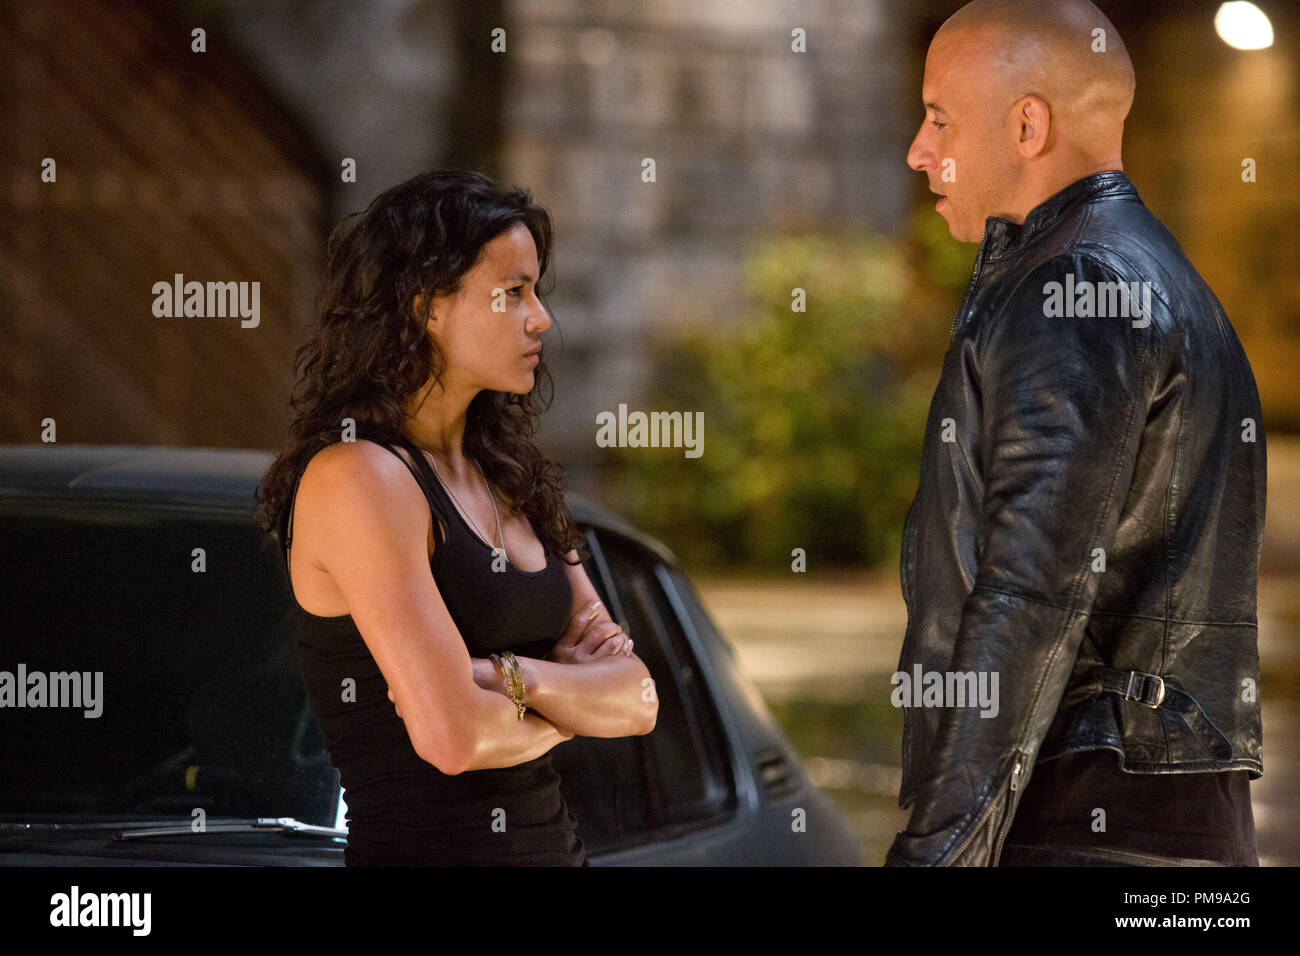 Fast And Furious Michelle Rodriguez